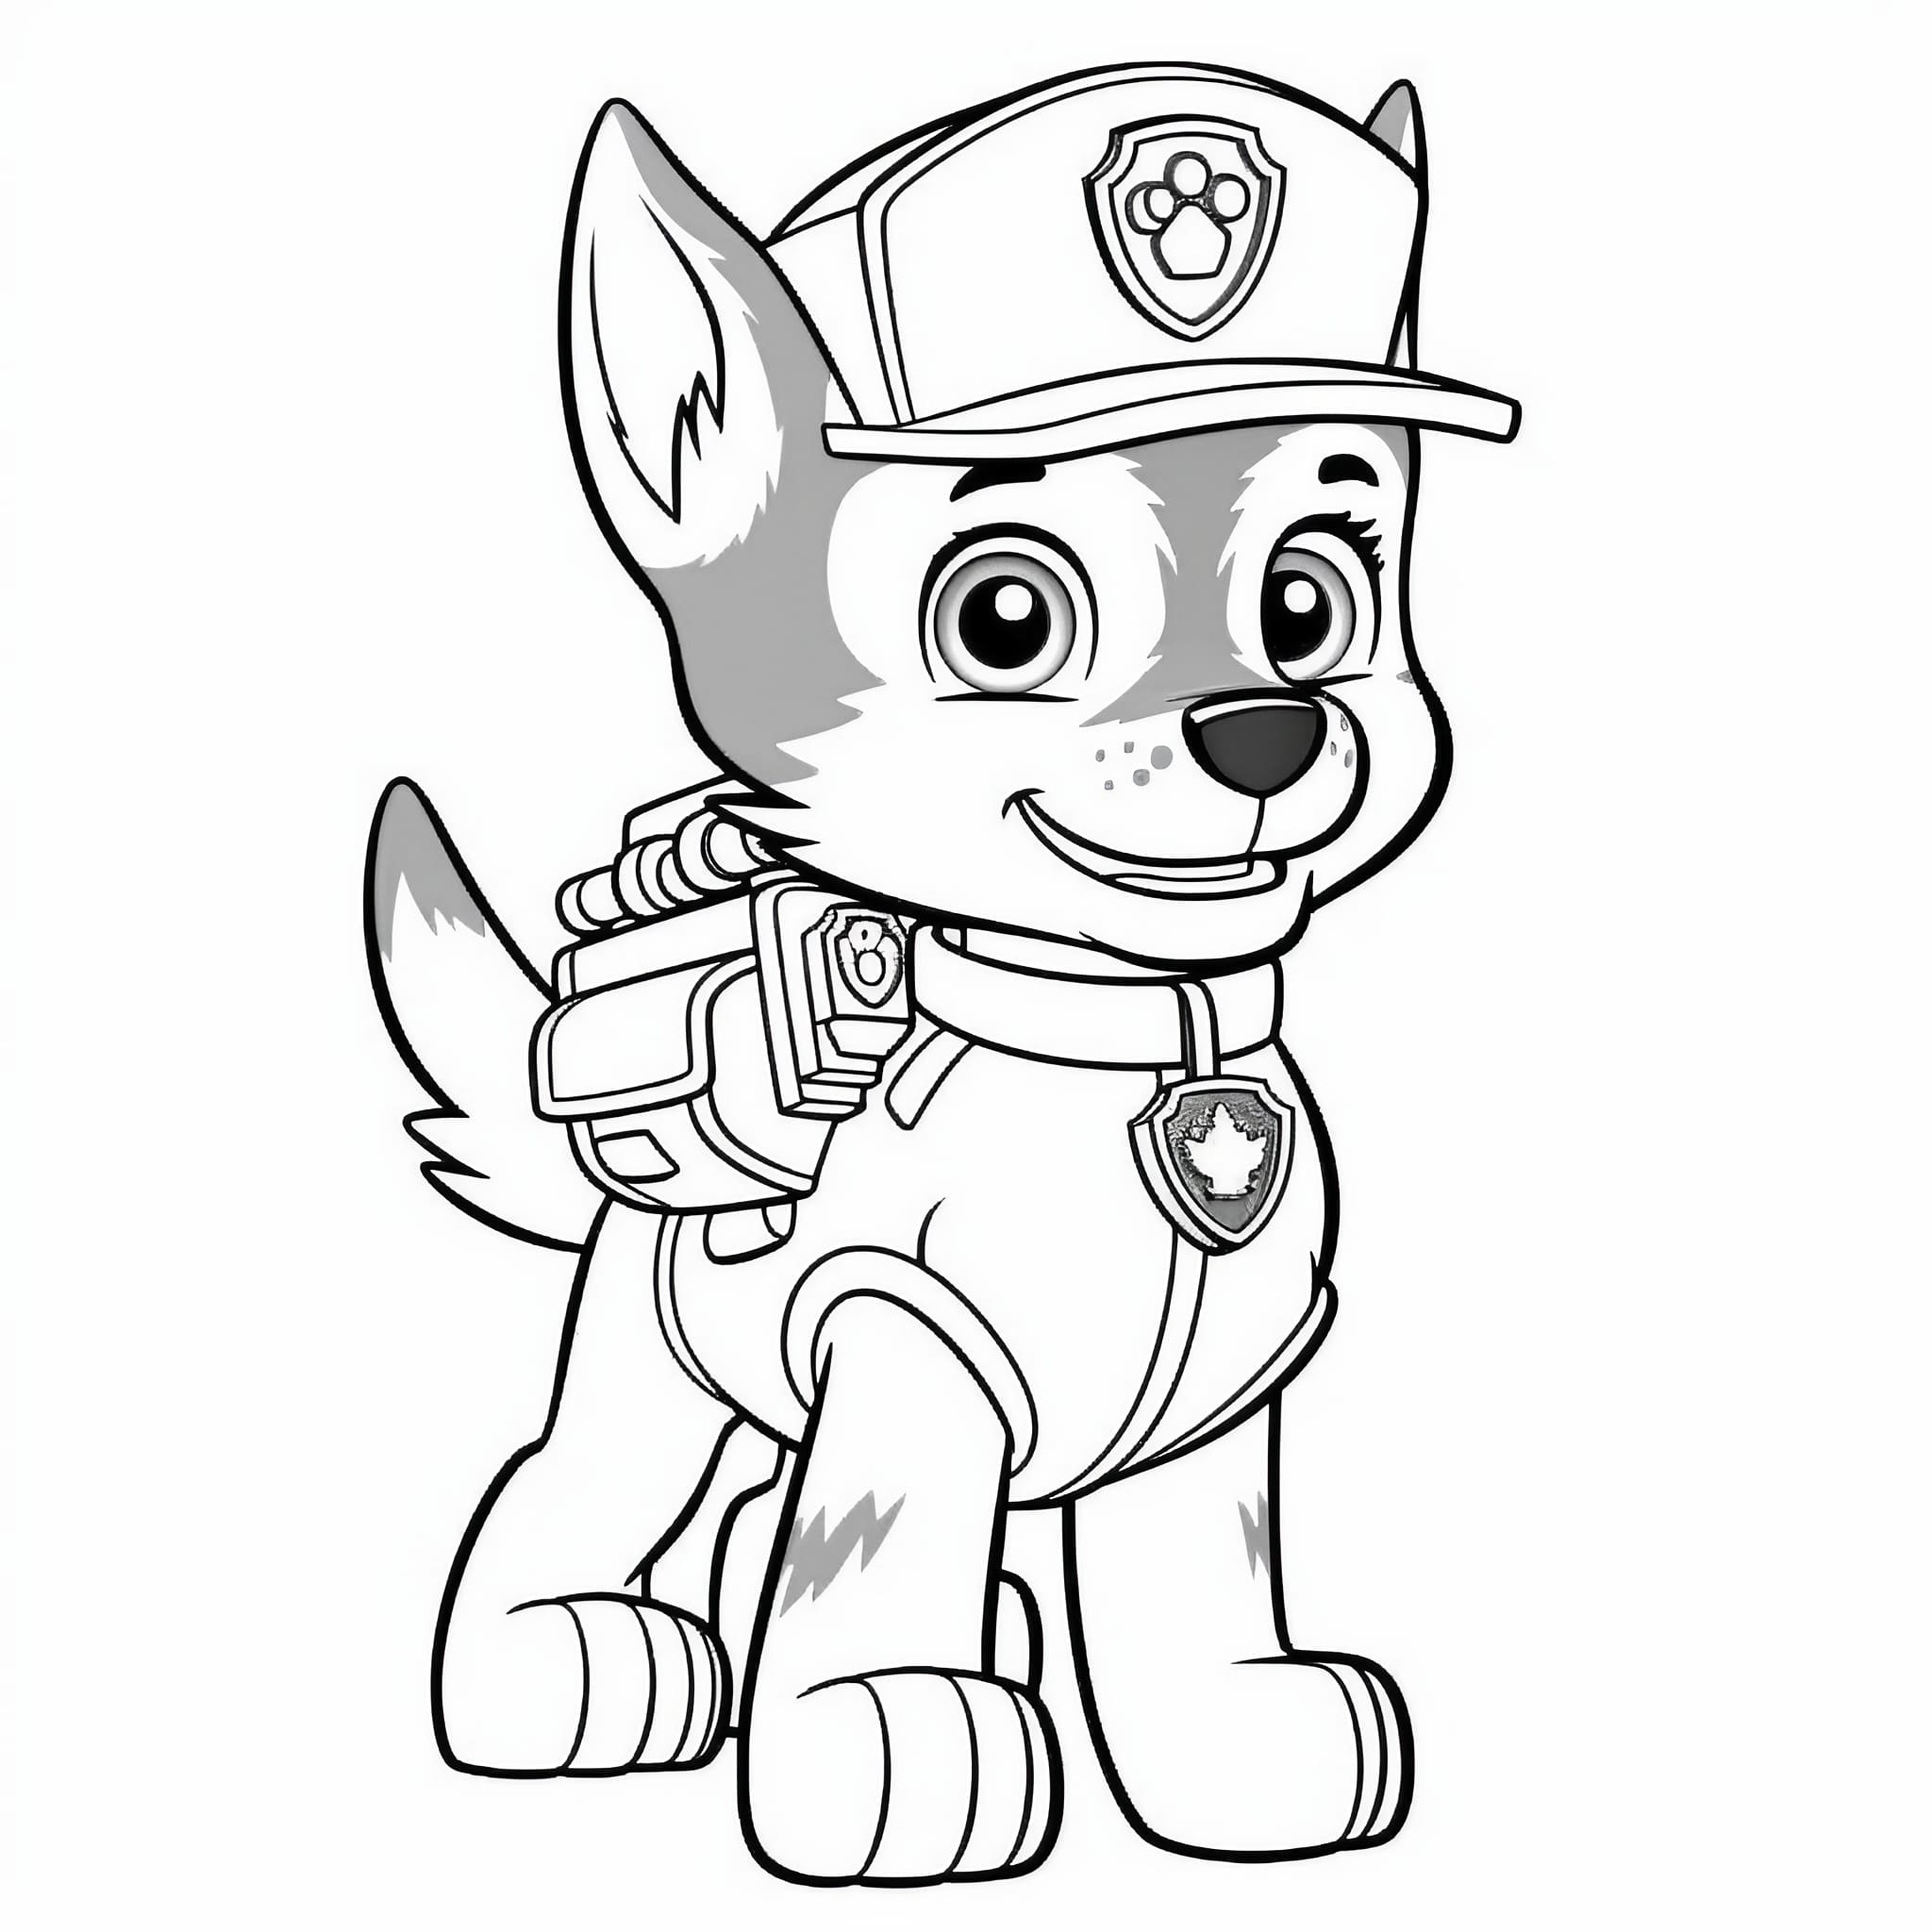 Paw patrol coloring pages for free printable